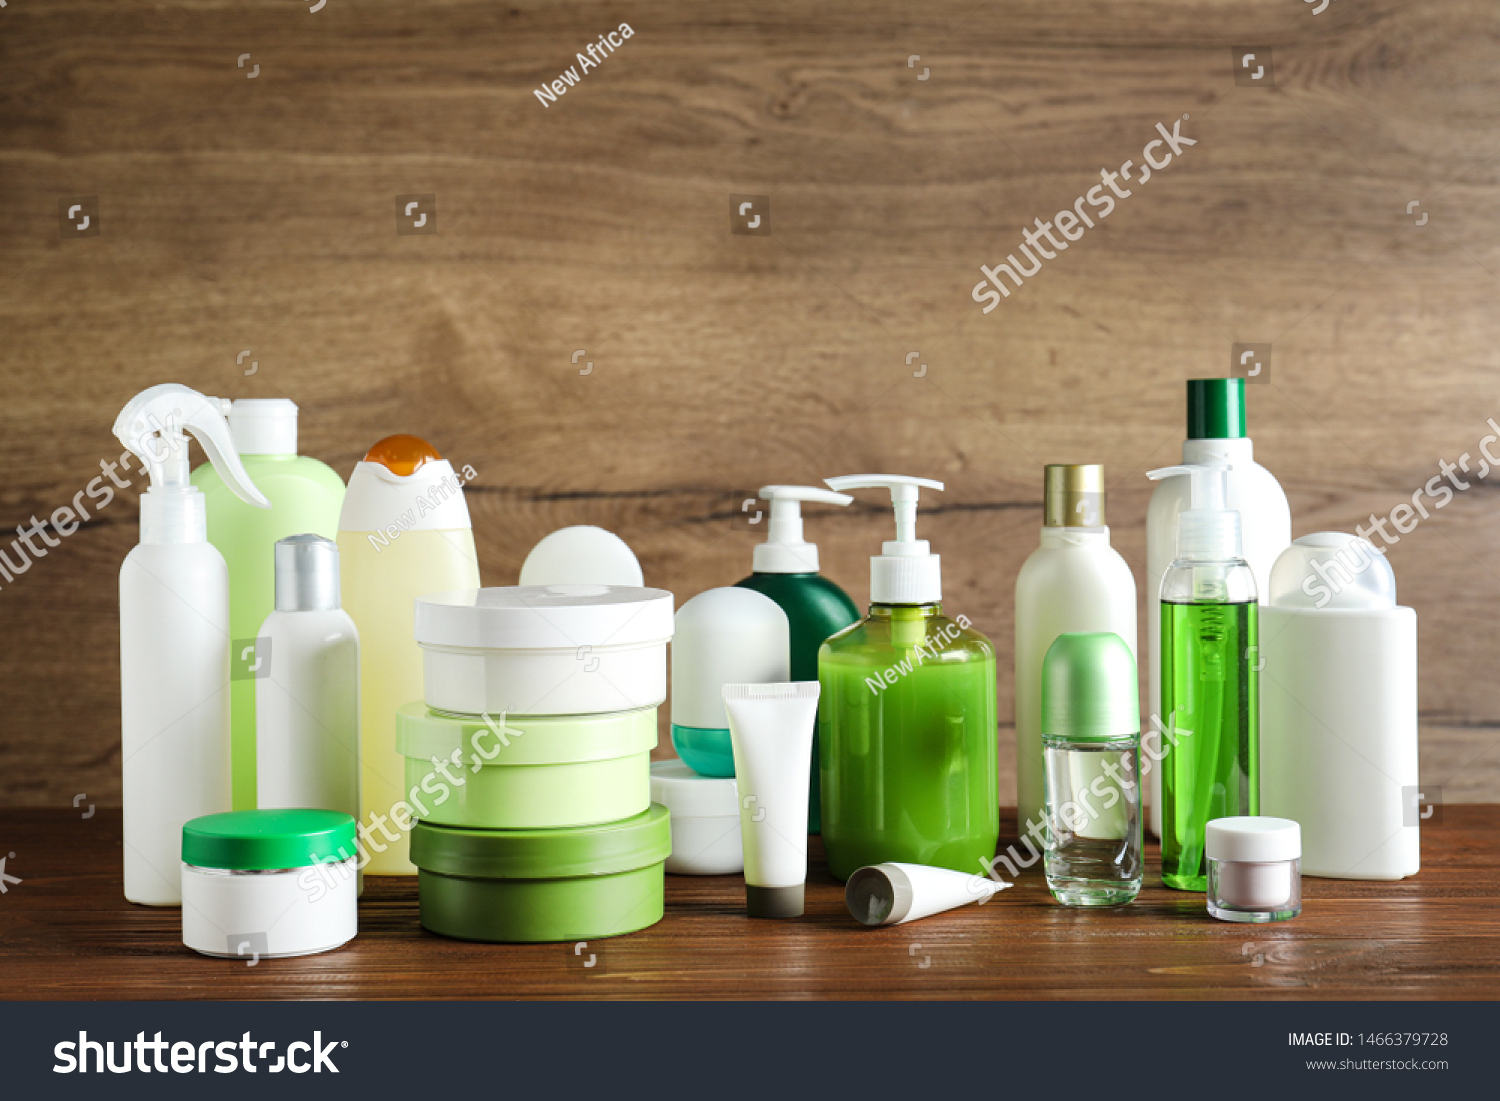 Different body care products on table against wooden background #1466379728